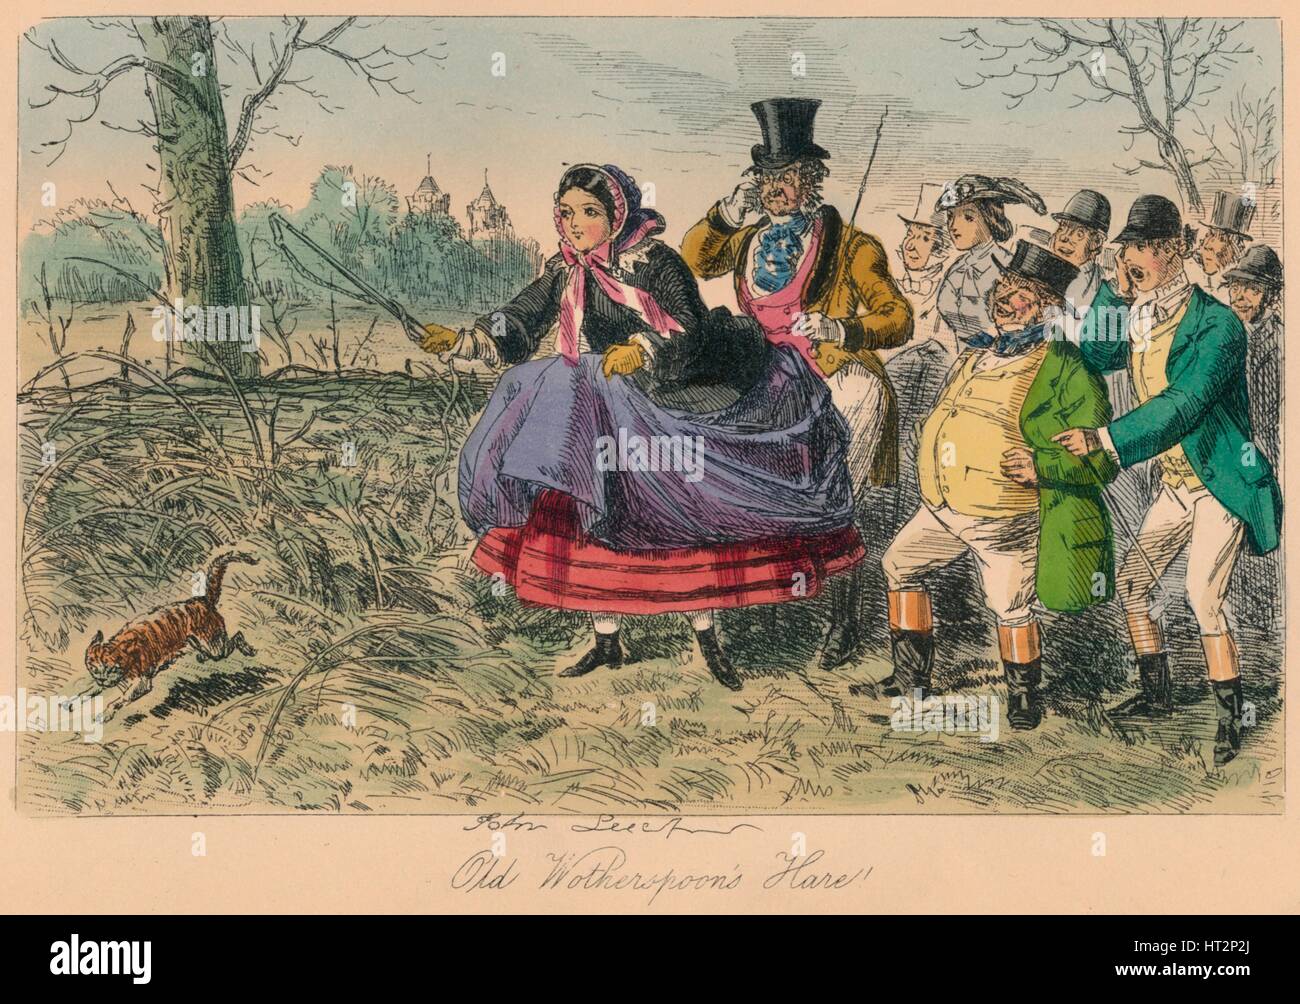 'Vieux Wotherspoon's Hare !', 1858. Artiste : John Leech. Banque D'Images